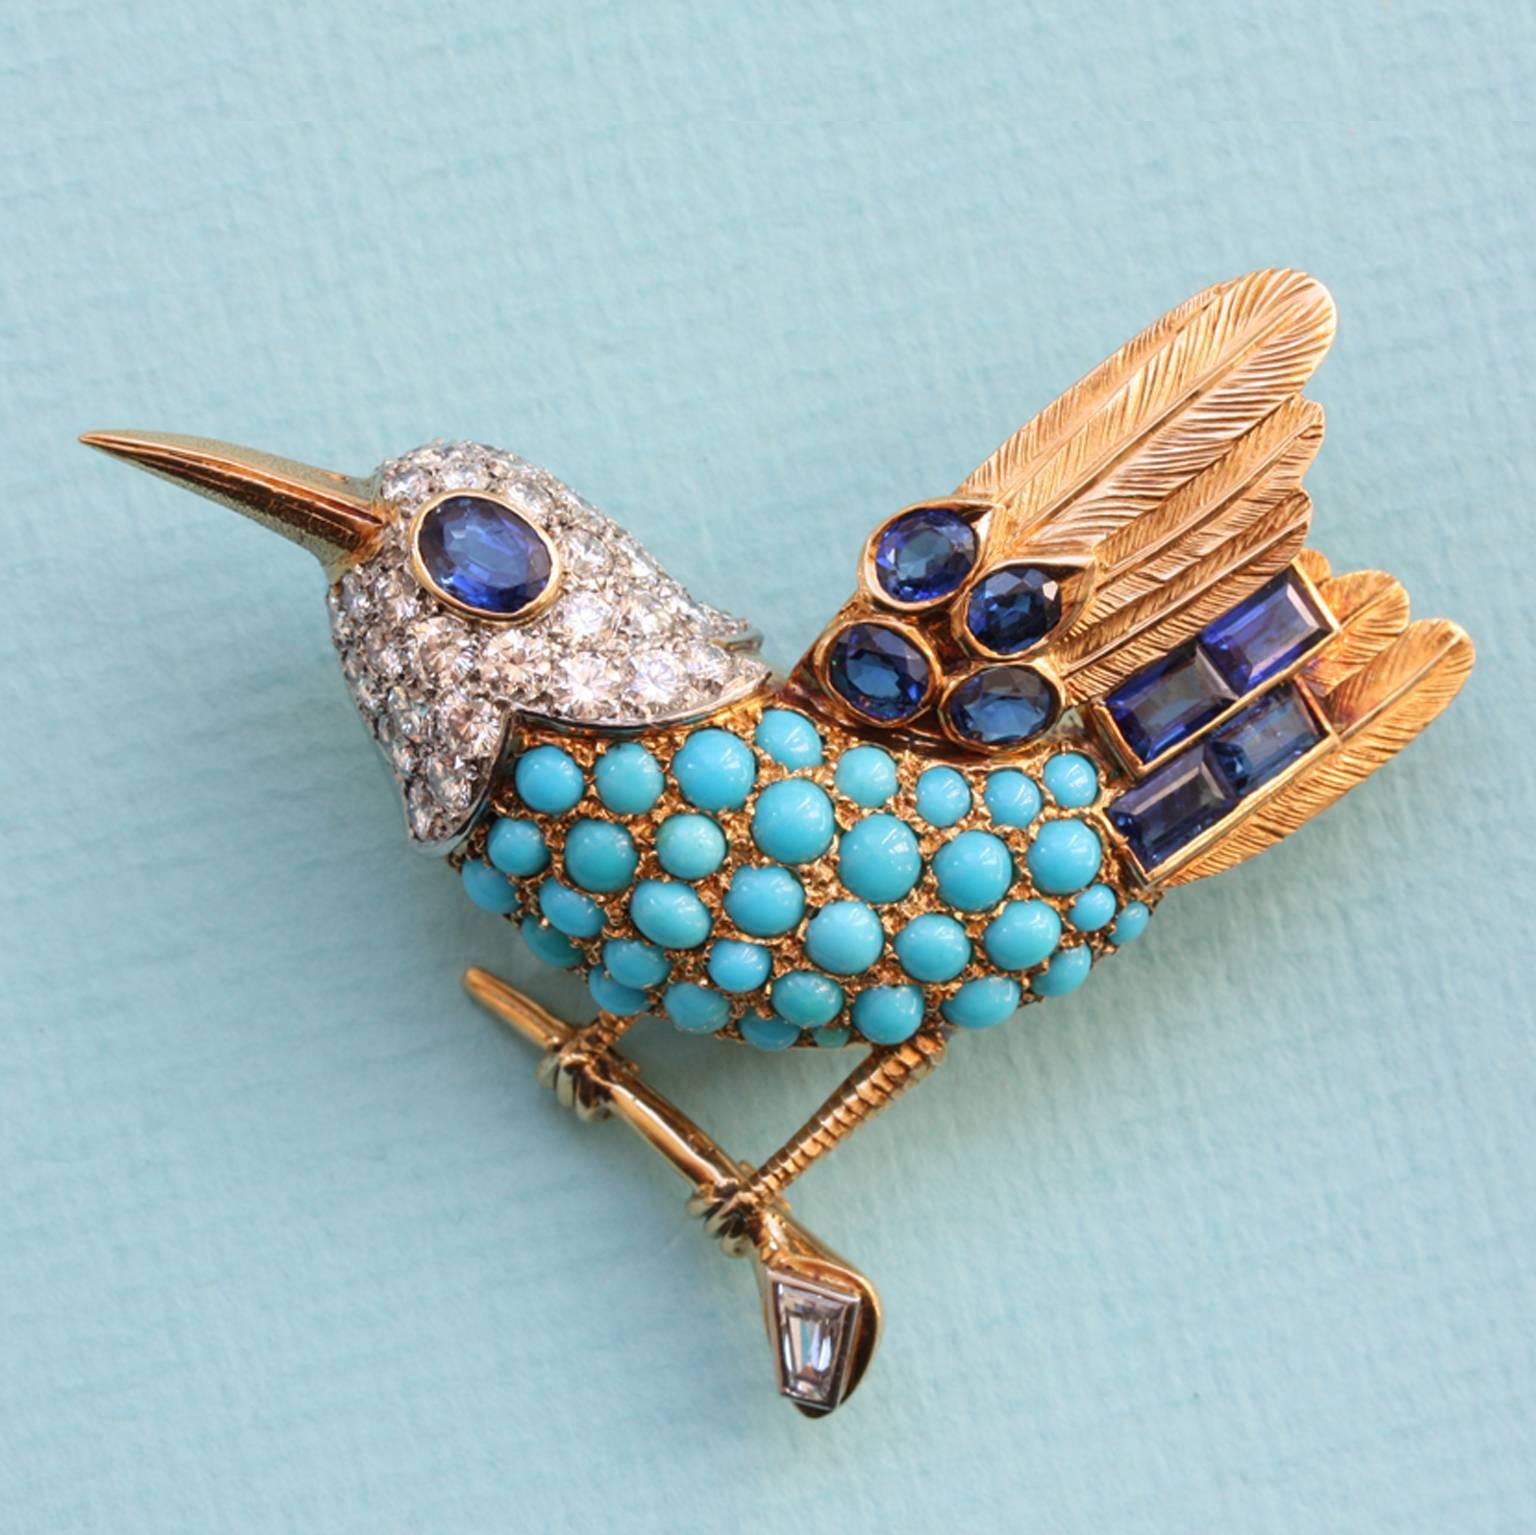 An 18-carat gold bird set with cabochon-cut turquoises and brilliant-cut diamonds (app. 2 carats) set in platinum; the eye and feathers are set with oval- and baguette cut-sapphires (app. 2 carats). The bird is perched on a tiny branch with a